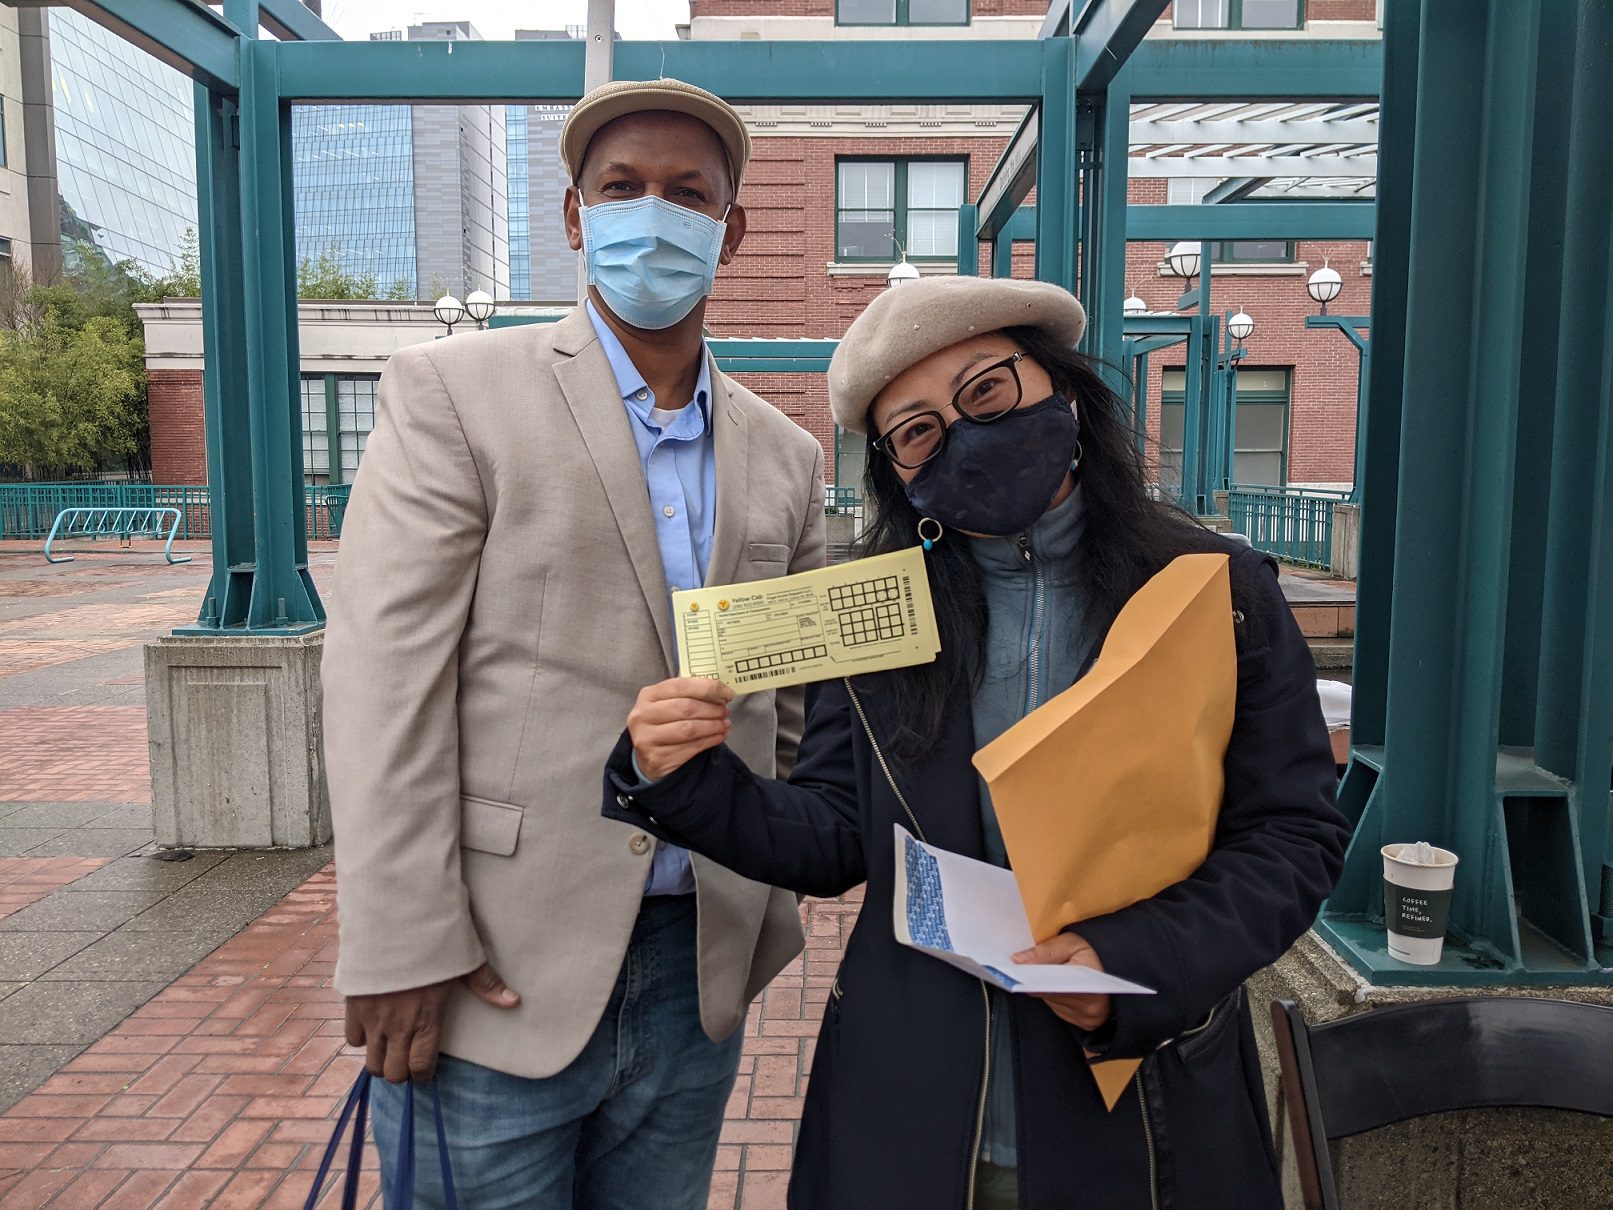 Two people standing outside wearing masks smile at the camera. The women on the right side holds up paper vouchers from the Ride Now pilot program. Large brick buildings are present in the background.